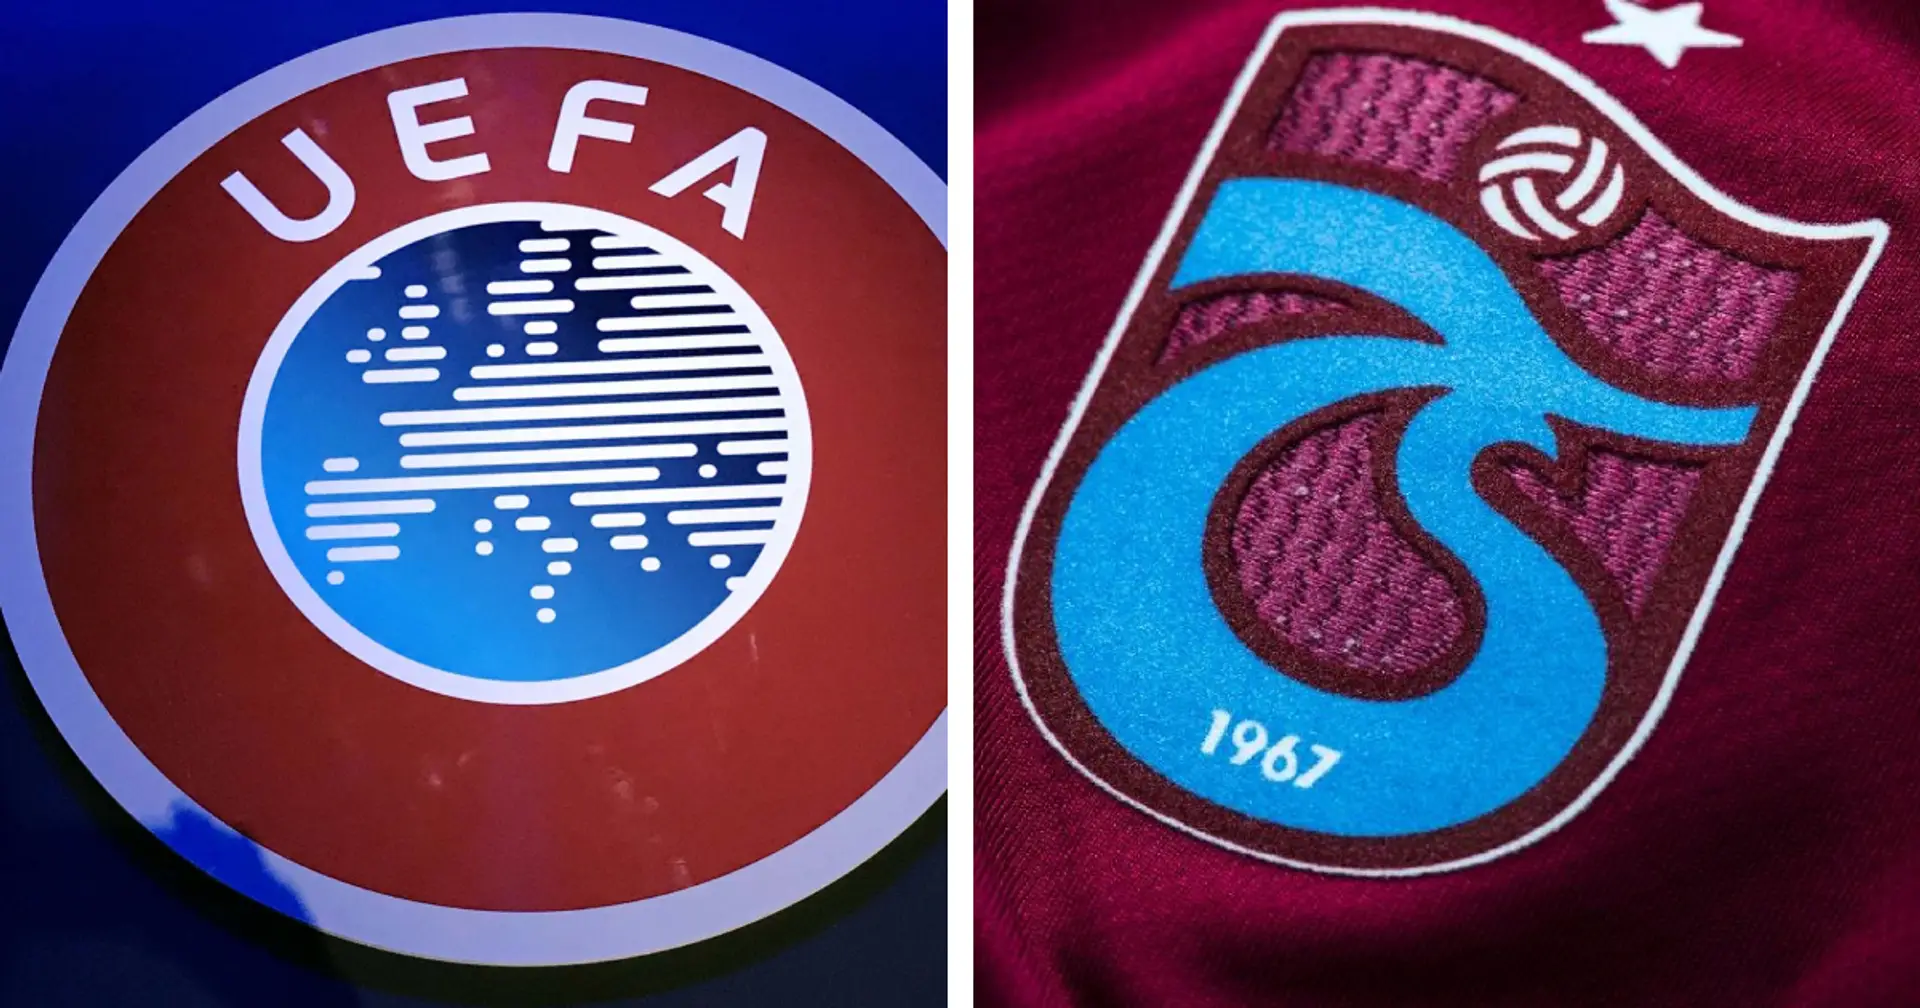 Equal rights for everyone? UEFA confirm Trabzonspor's UCL ban 2 weeks after Man City escape suspension